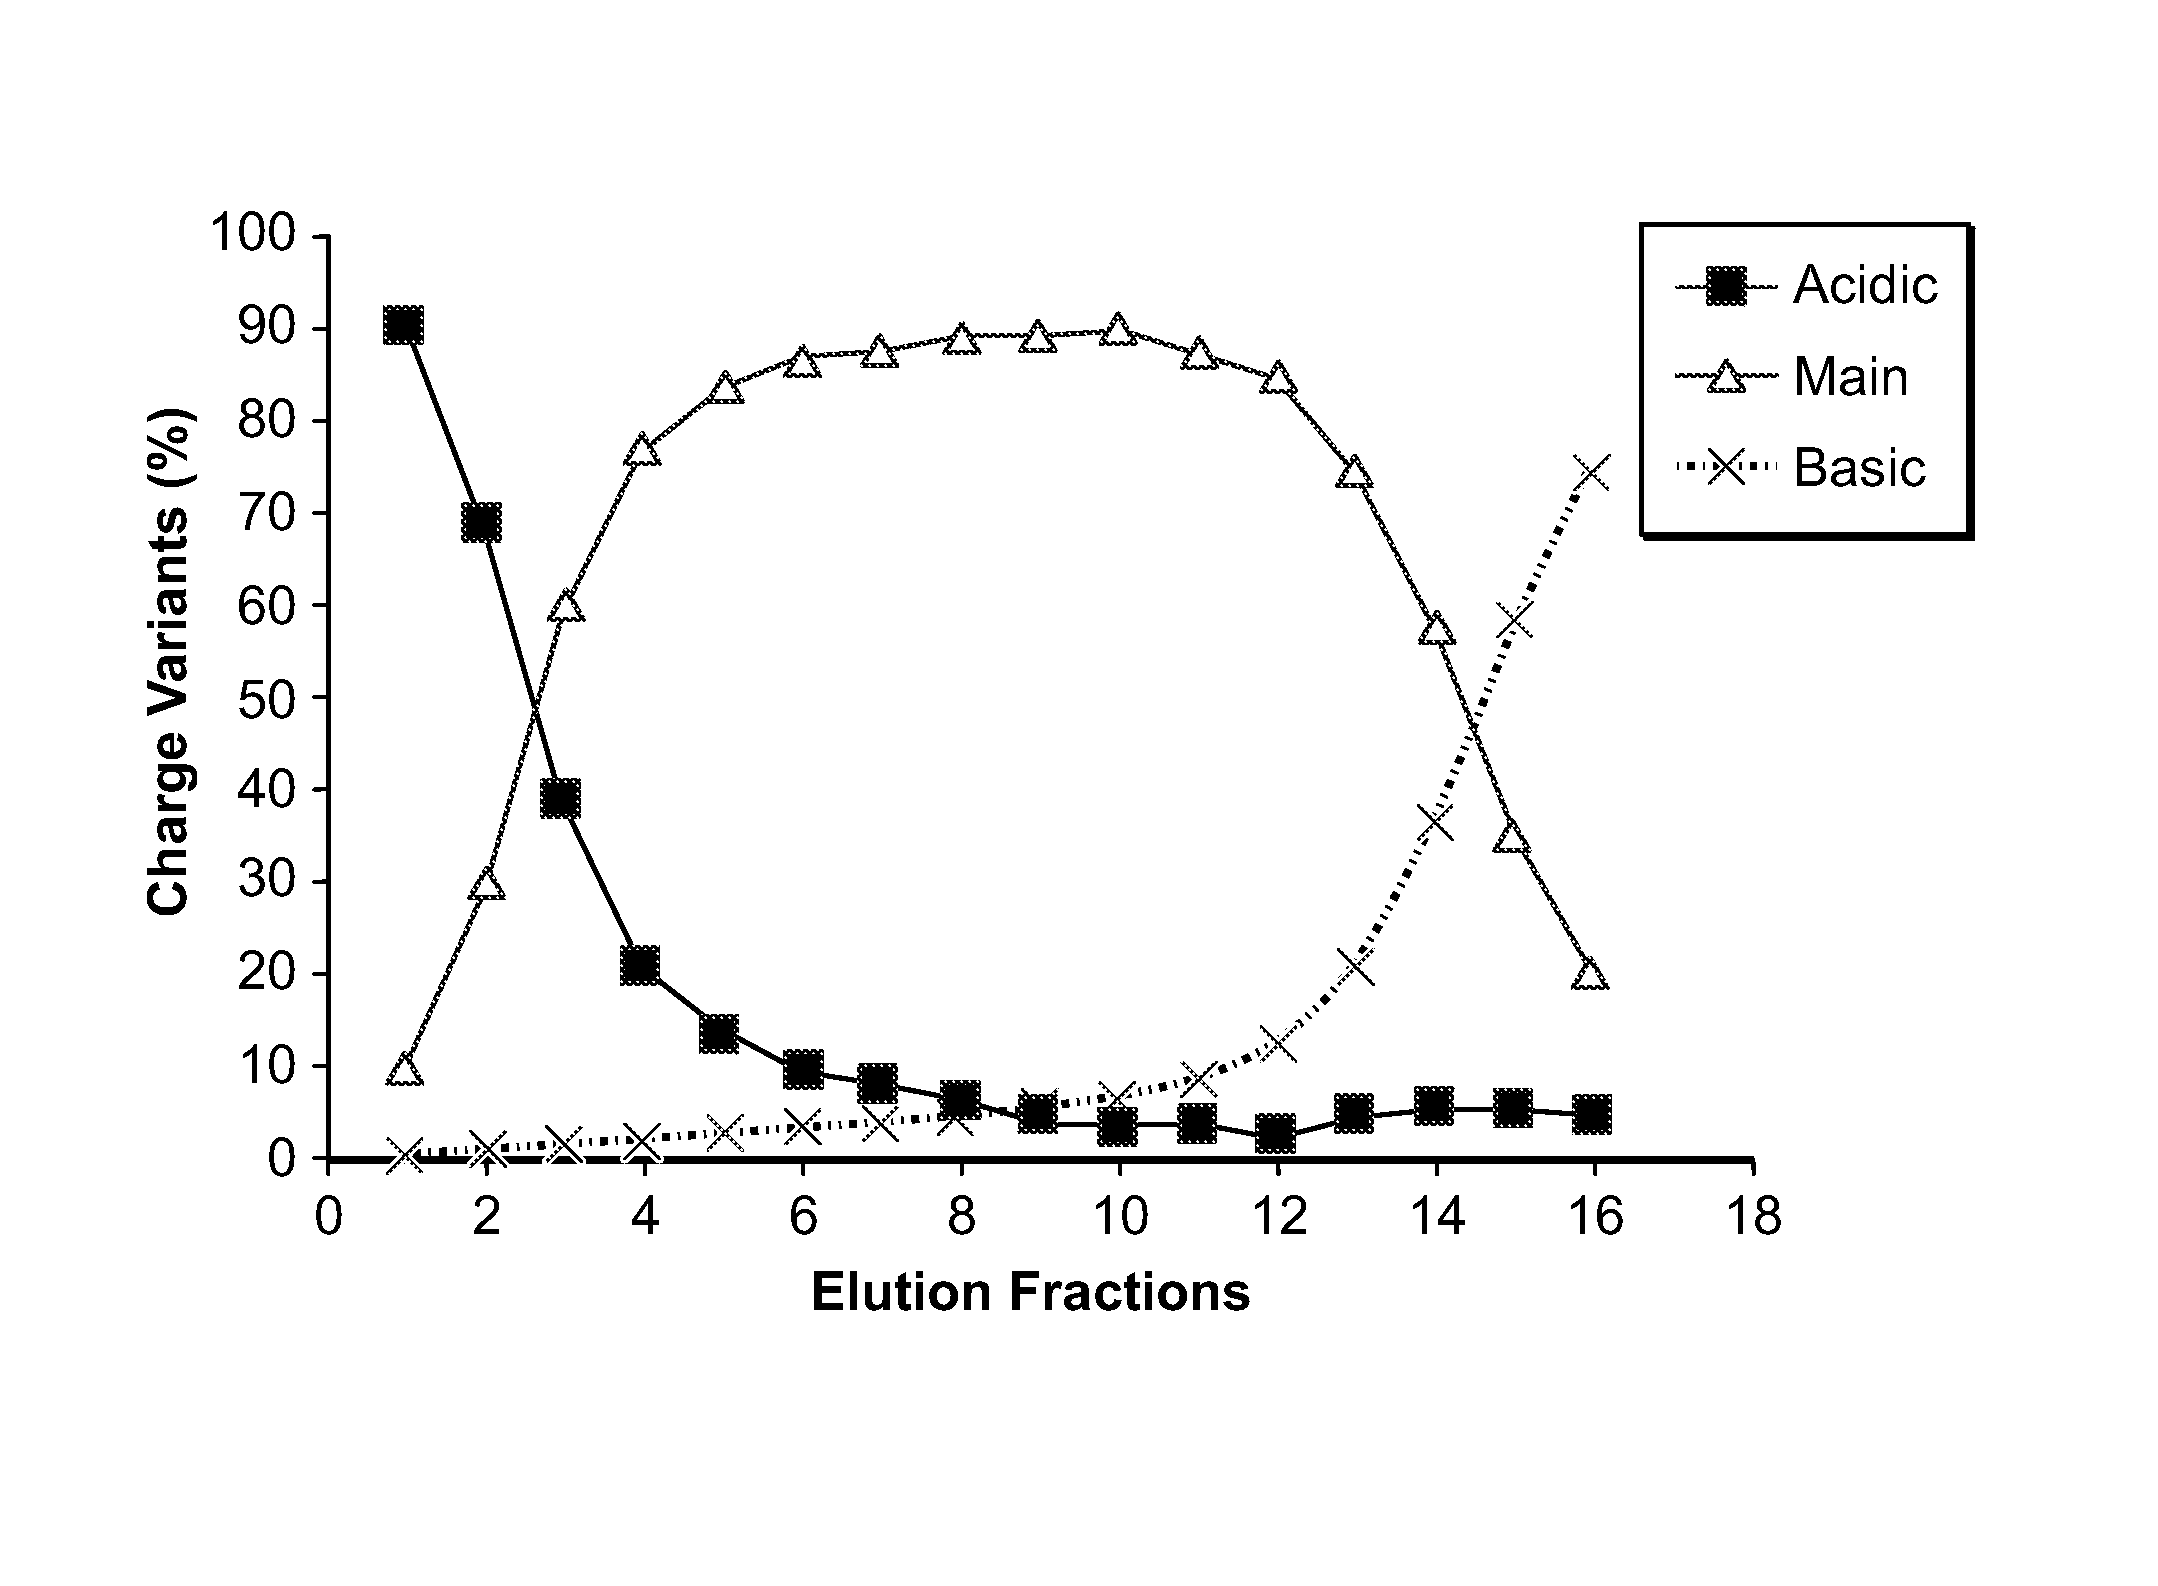 Low acidic species compositions and methods for producing and using the same using displacement chromatography